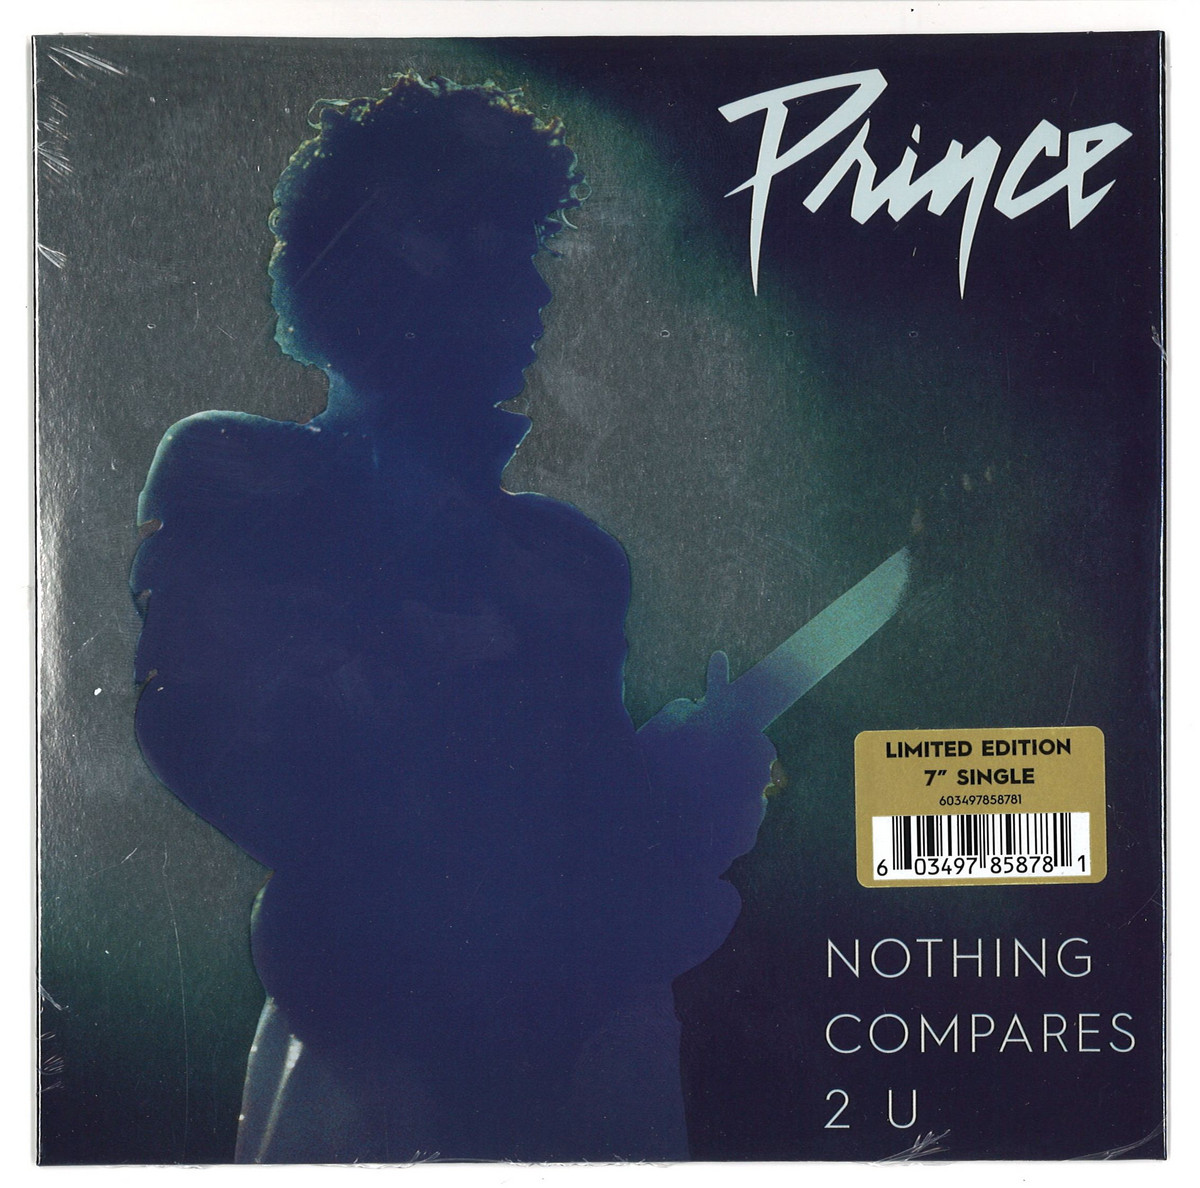 Песня nothing compares. Nothing compares 2 u Prince. The Family - "nothing compares 2 u",. Принц винил. Текст nothing compares 2 u.